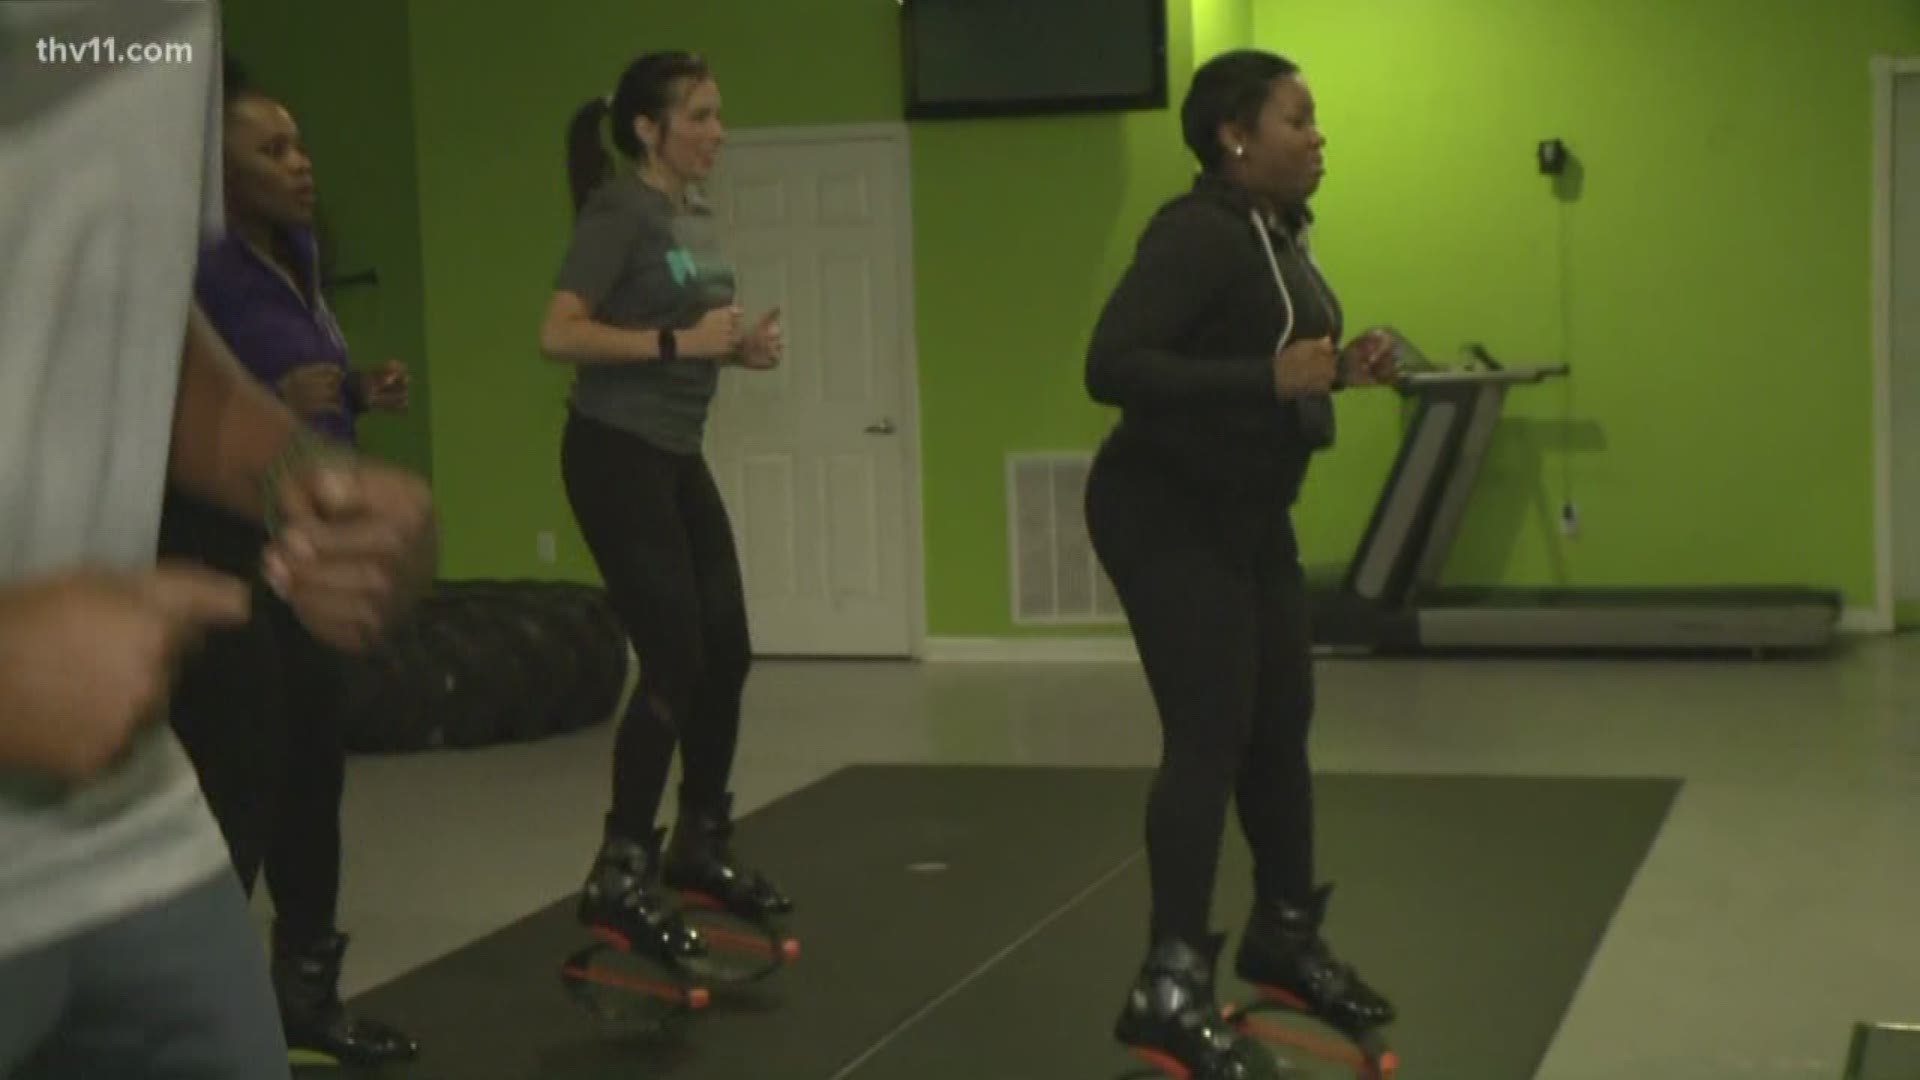 Kangoo Jumps Boot Camp at WOW Fitness is from 11 a.m. to noon on Jan. 12.